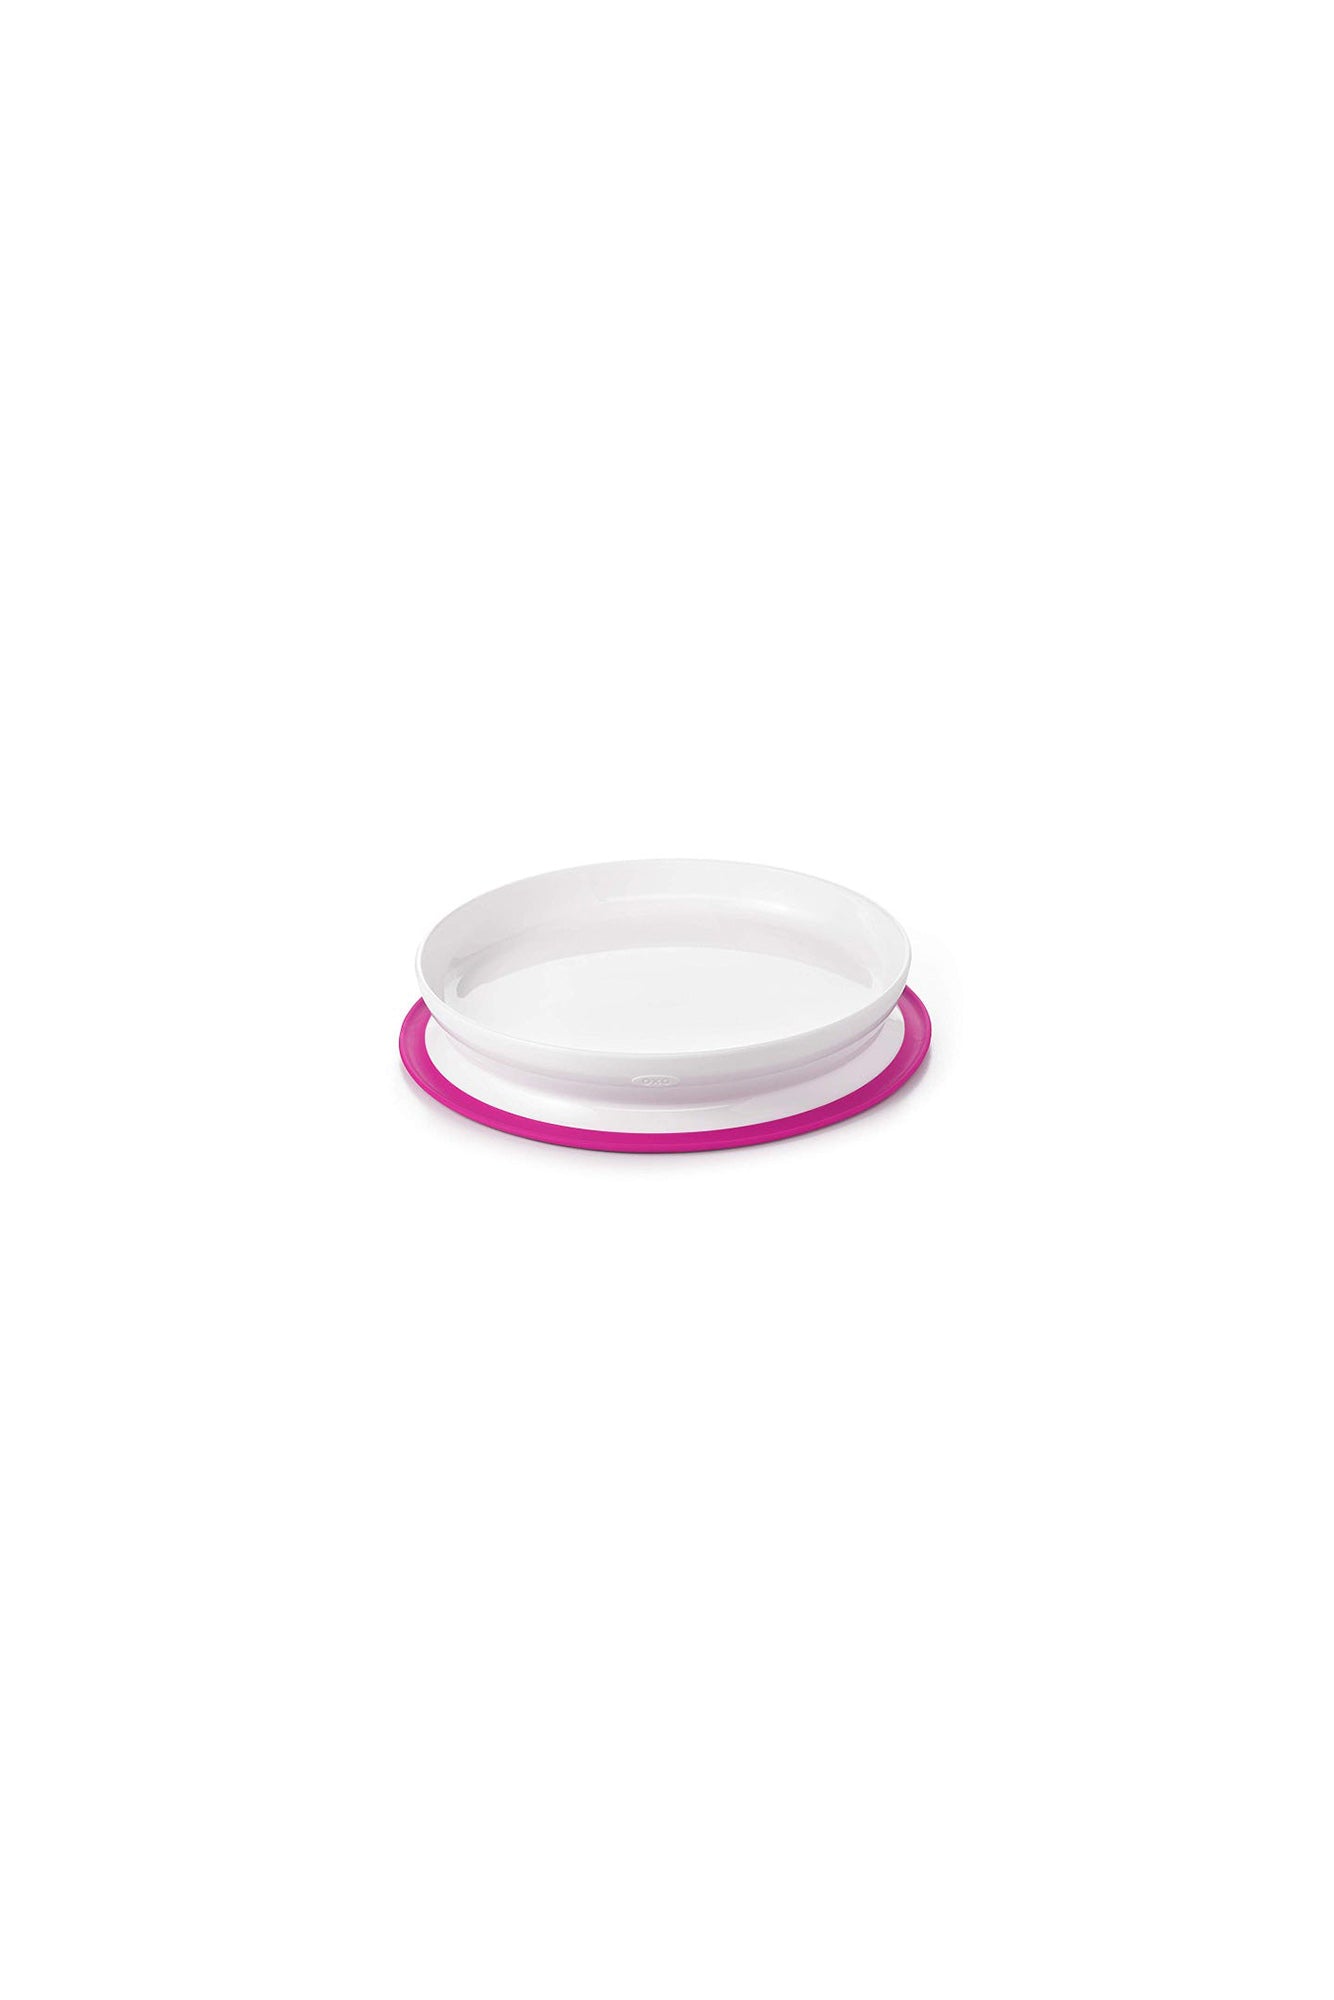 OXO - Tot Stick & Stay Divided Plate, Pink